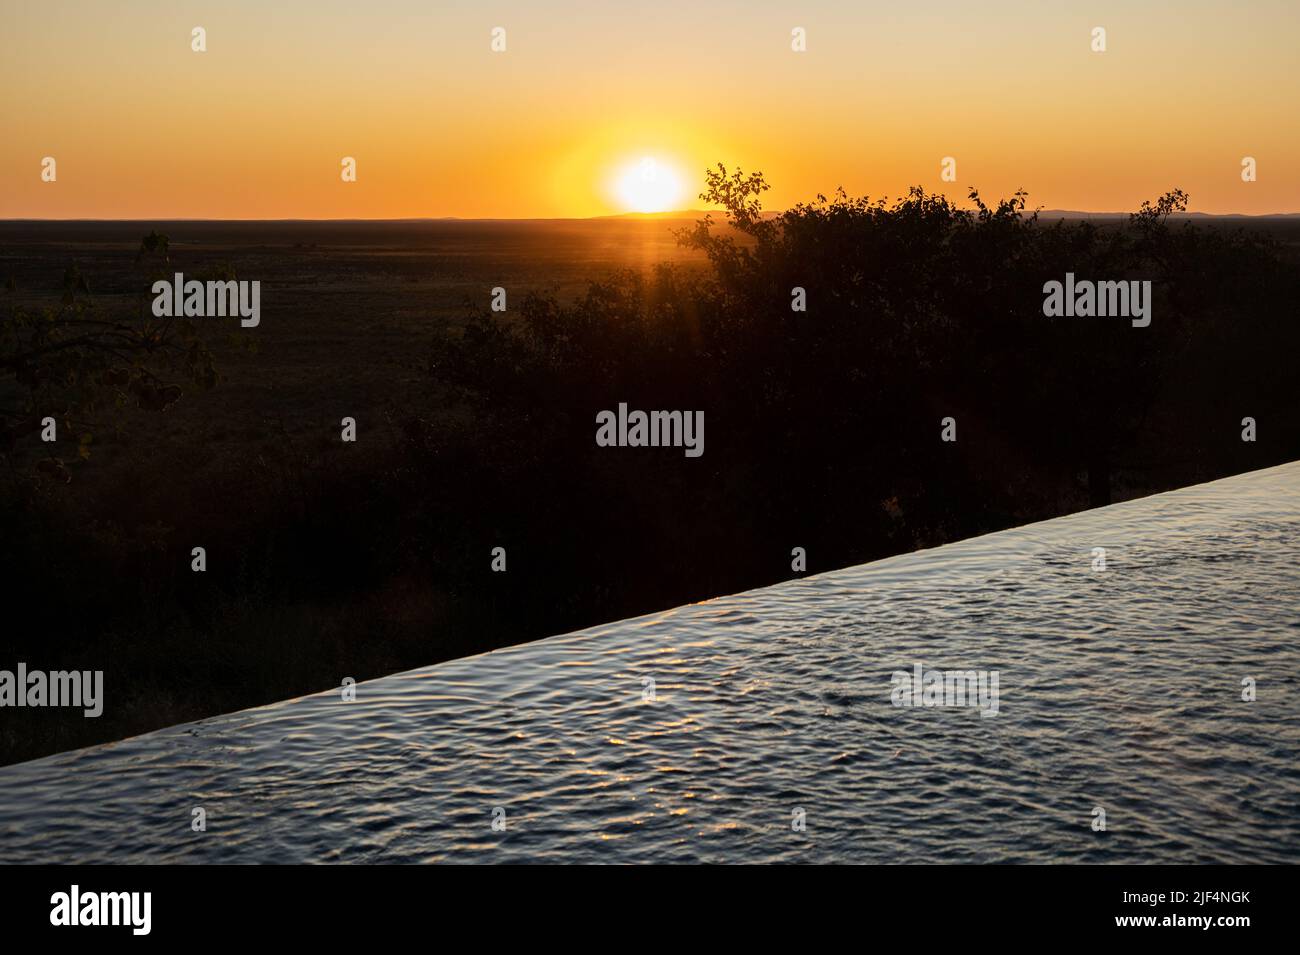 Sunset over an infinity pool Stock Photo